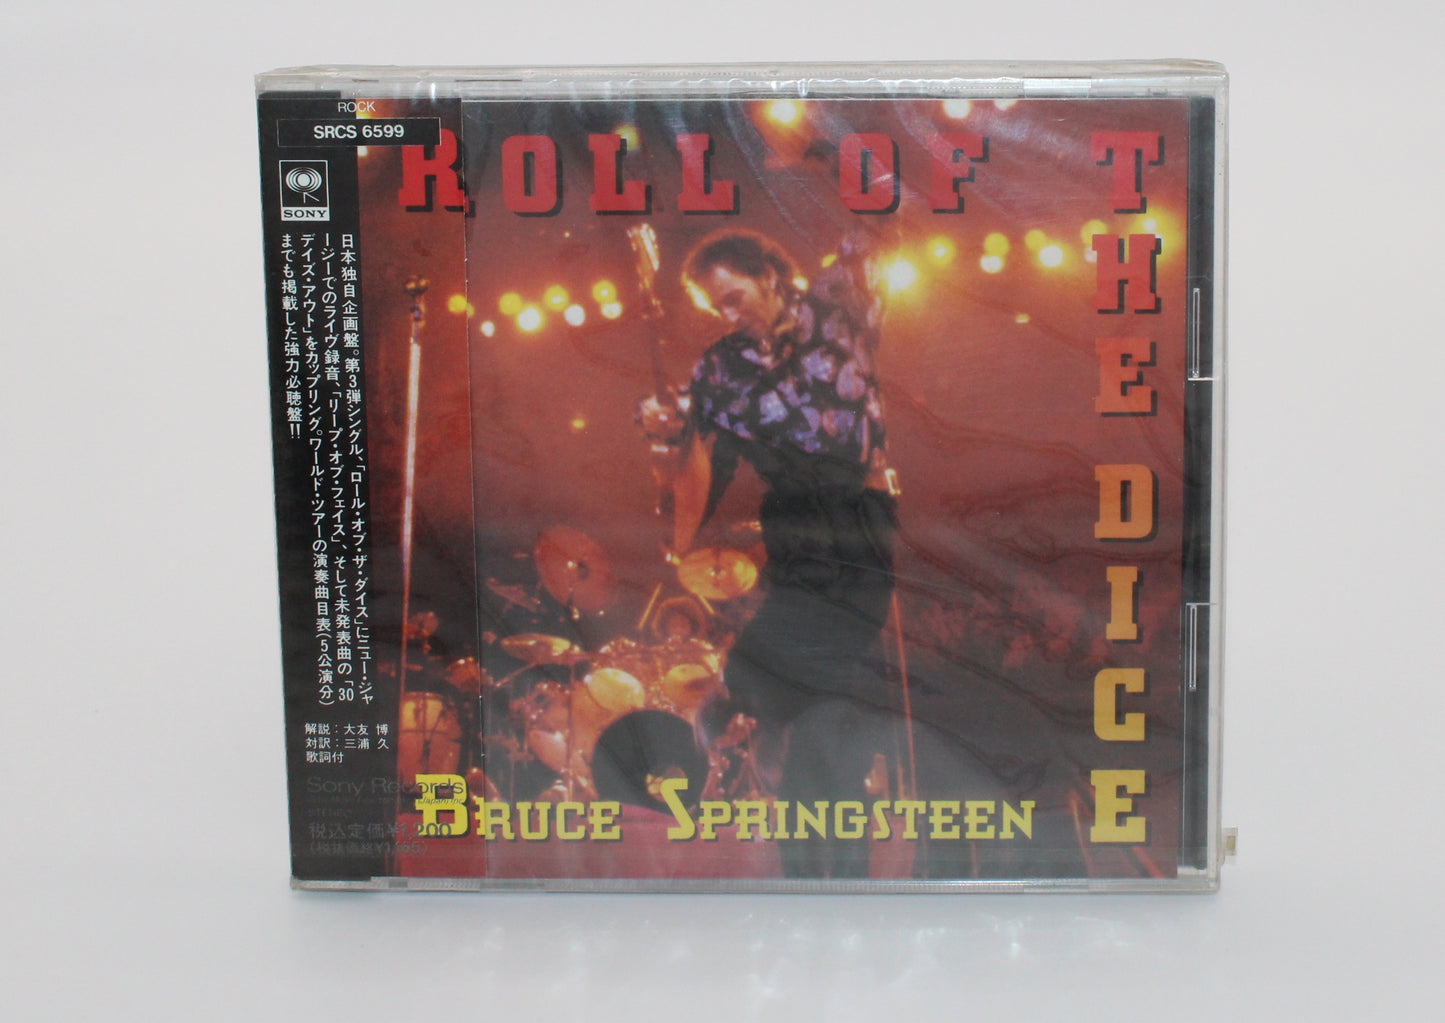 Bruce Springsteen CD/Sealed - Roll of the Dice - 3 Track Japan Import Sealed